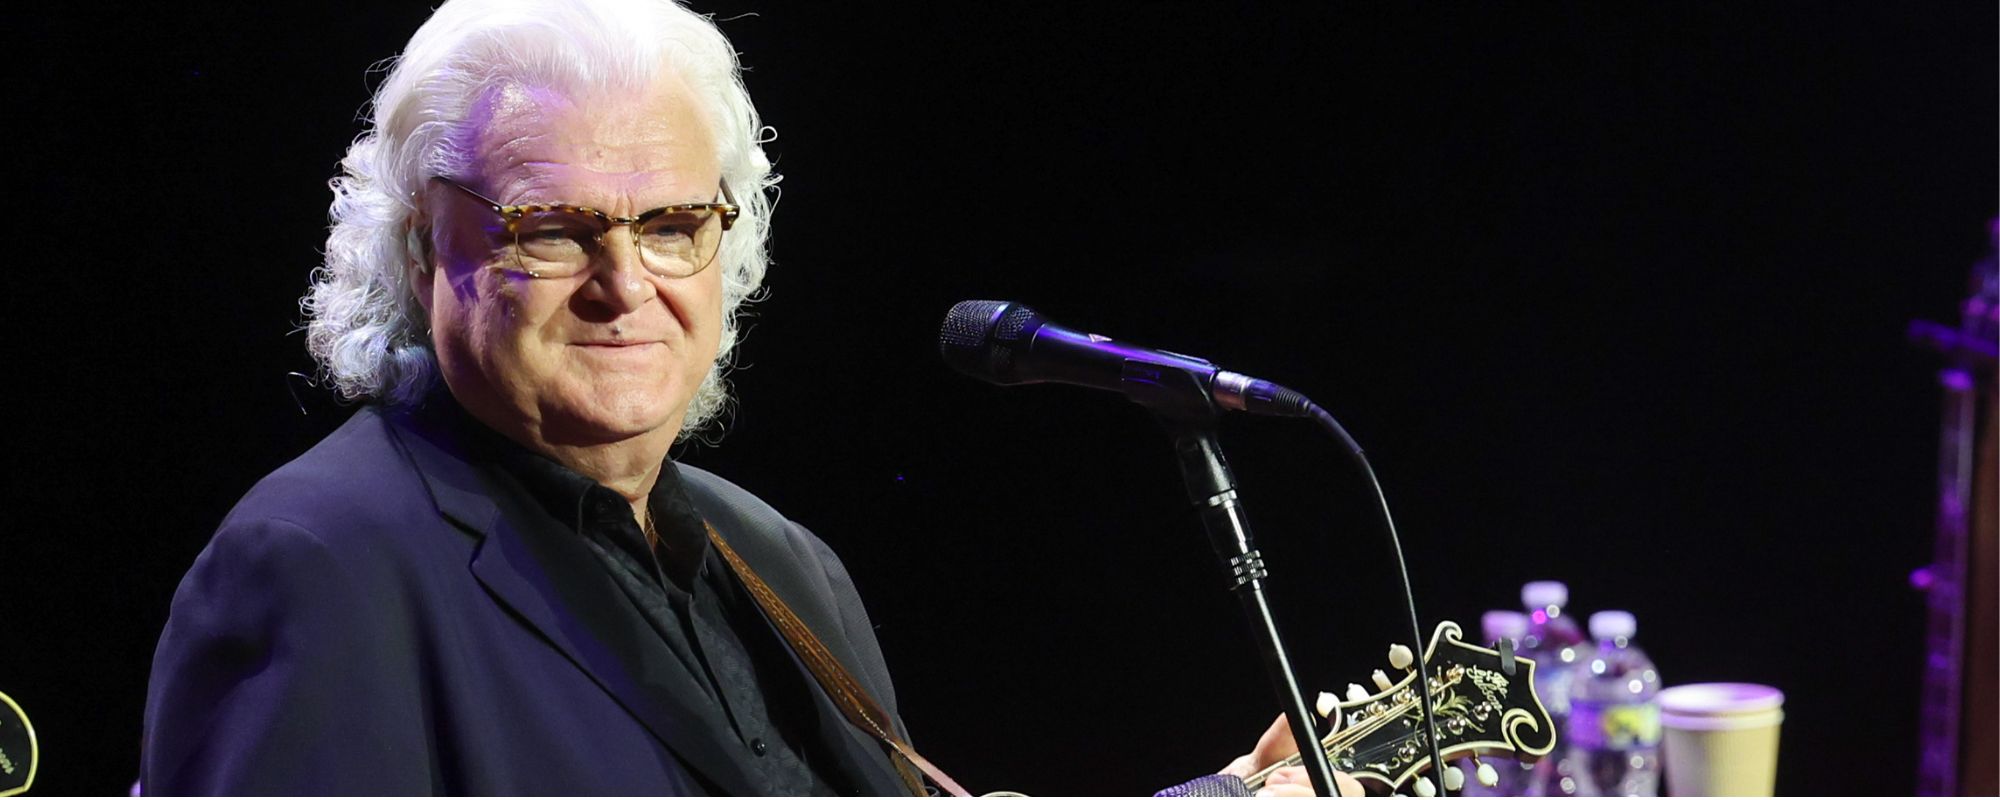 Top 3 Moments from Bluegrass Nights at The Ryman with Ricky Skaggs